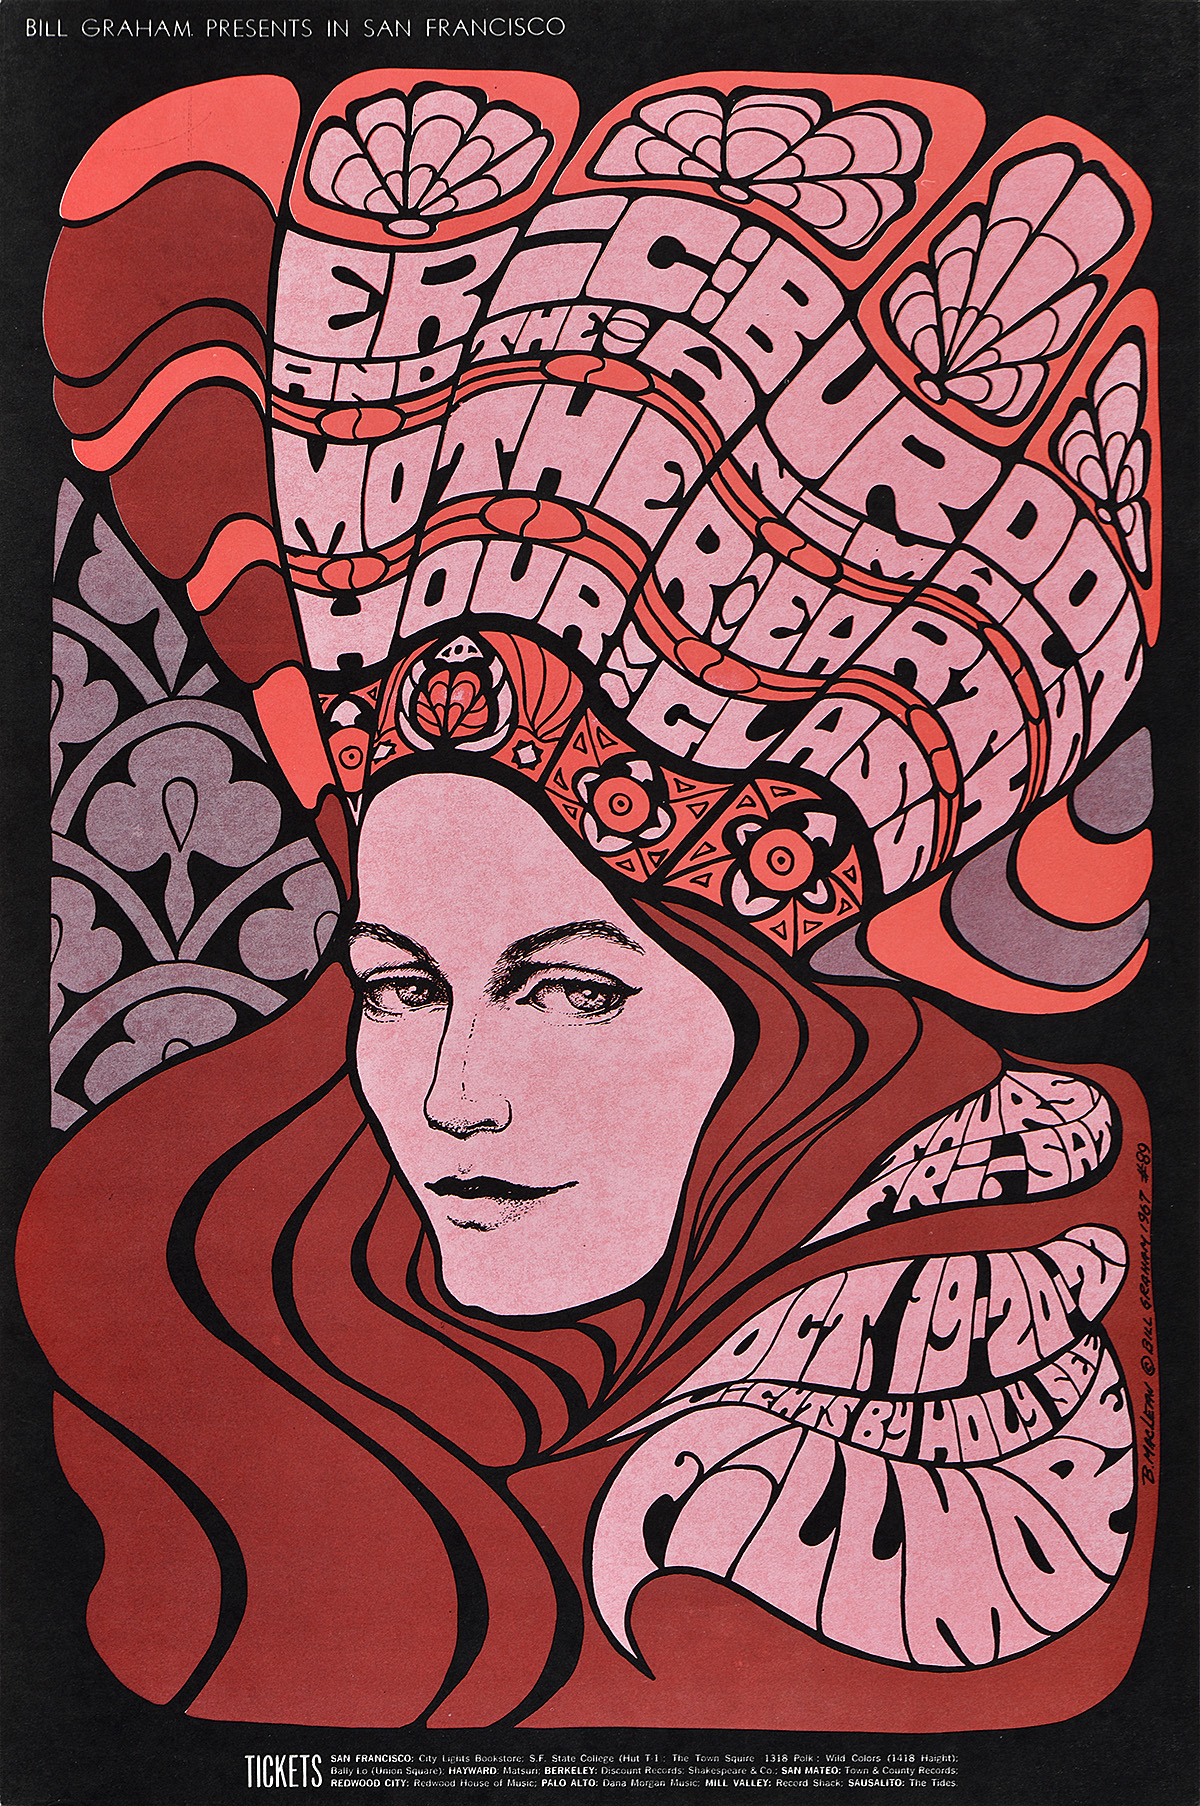 illustrational psychedelic inspired poster of a woman with flowing hair and an oversized crown filled with words